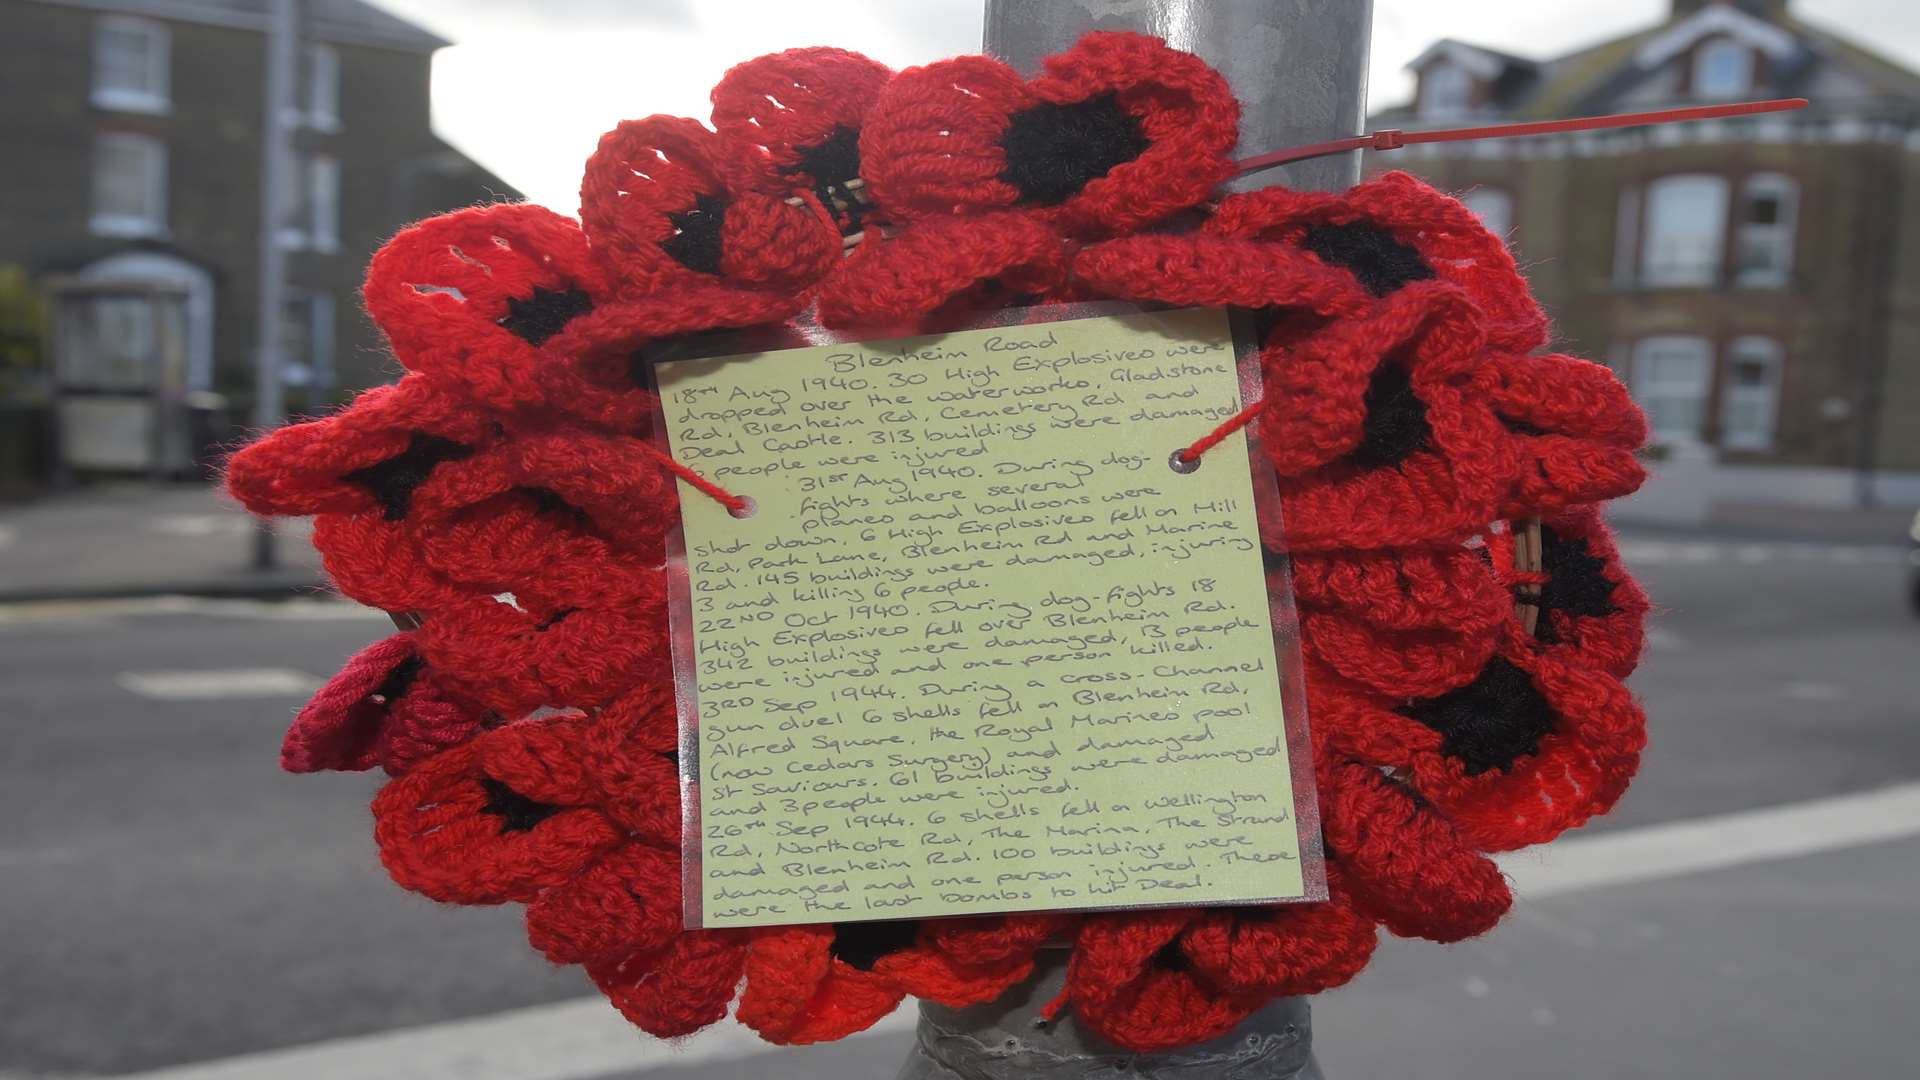 A detailed history is attached to the wreath in Blenheim Road